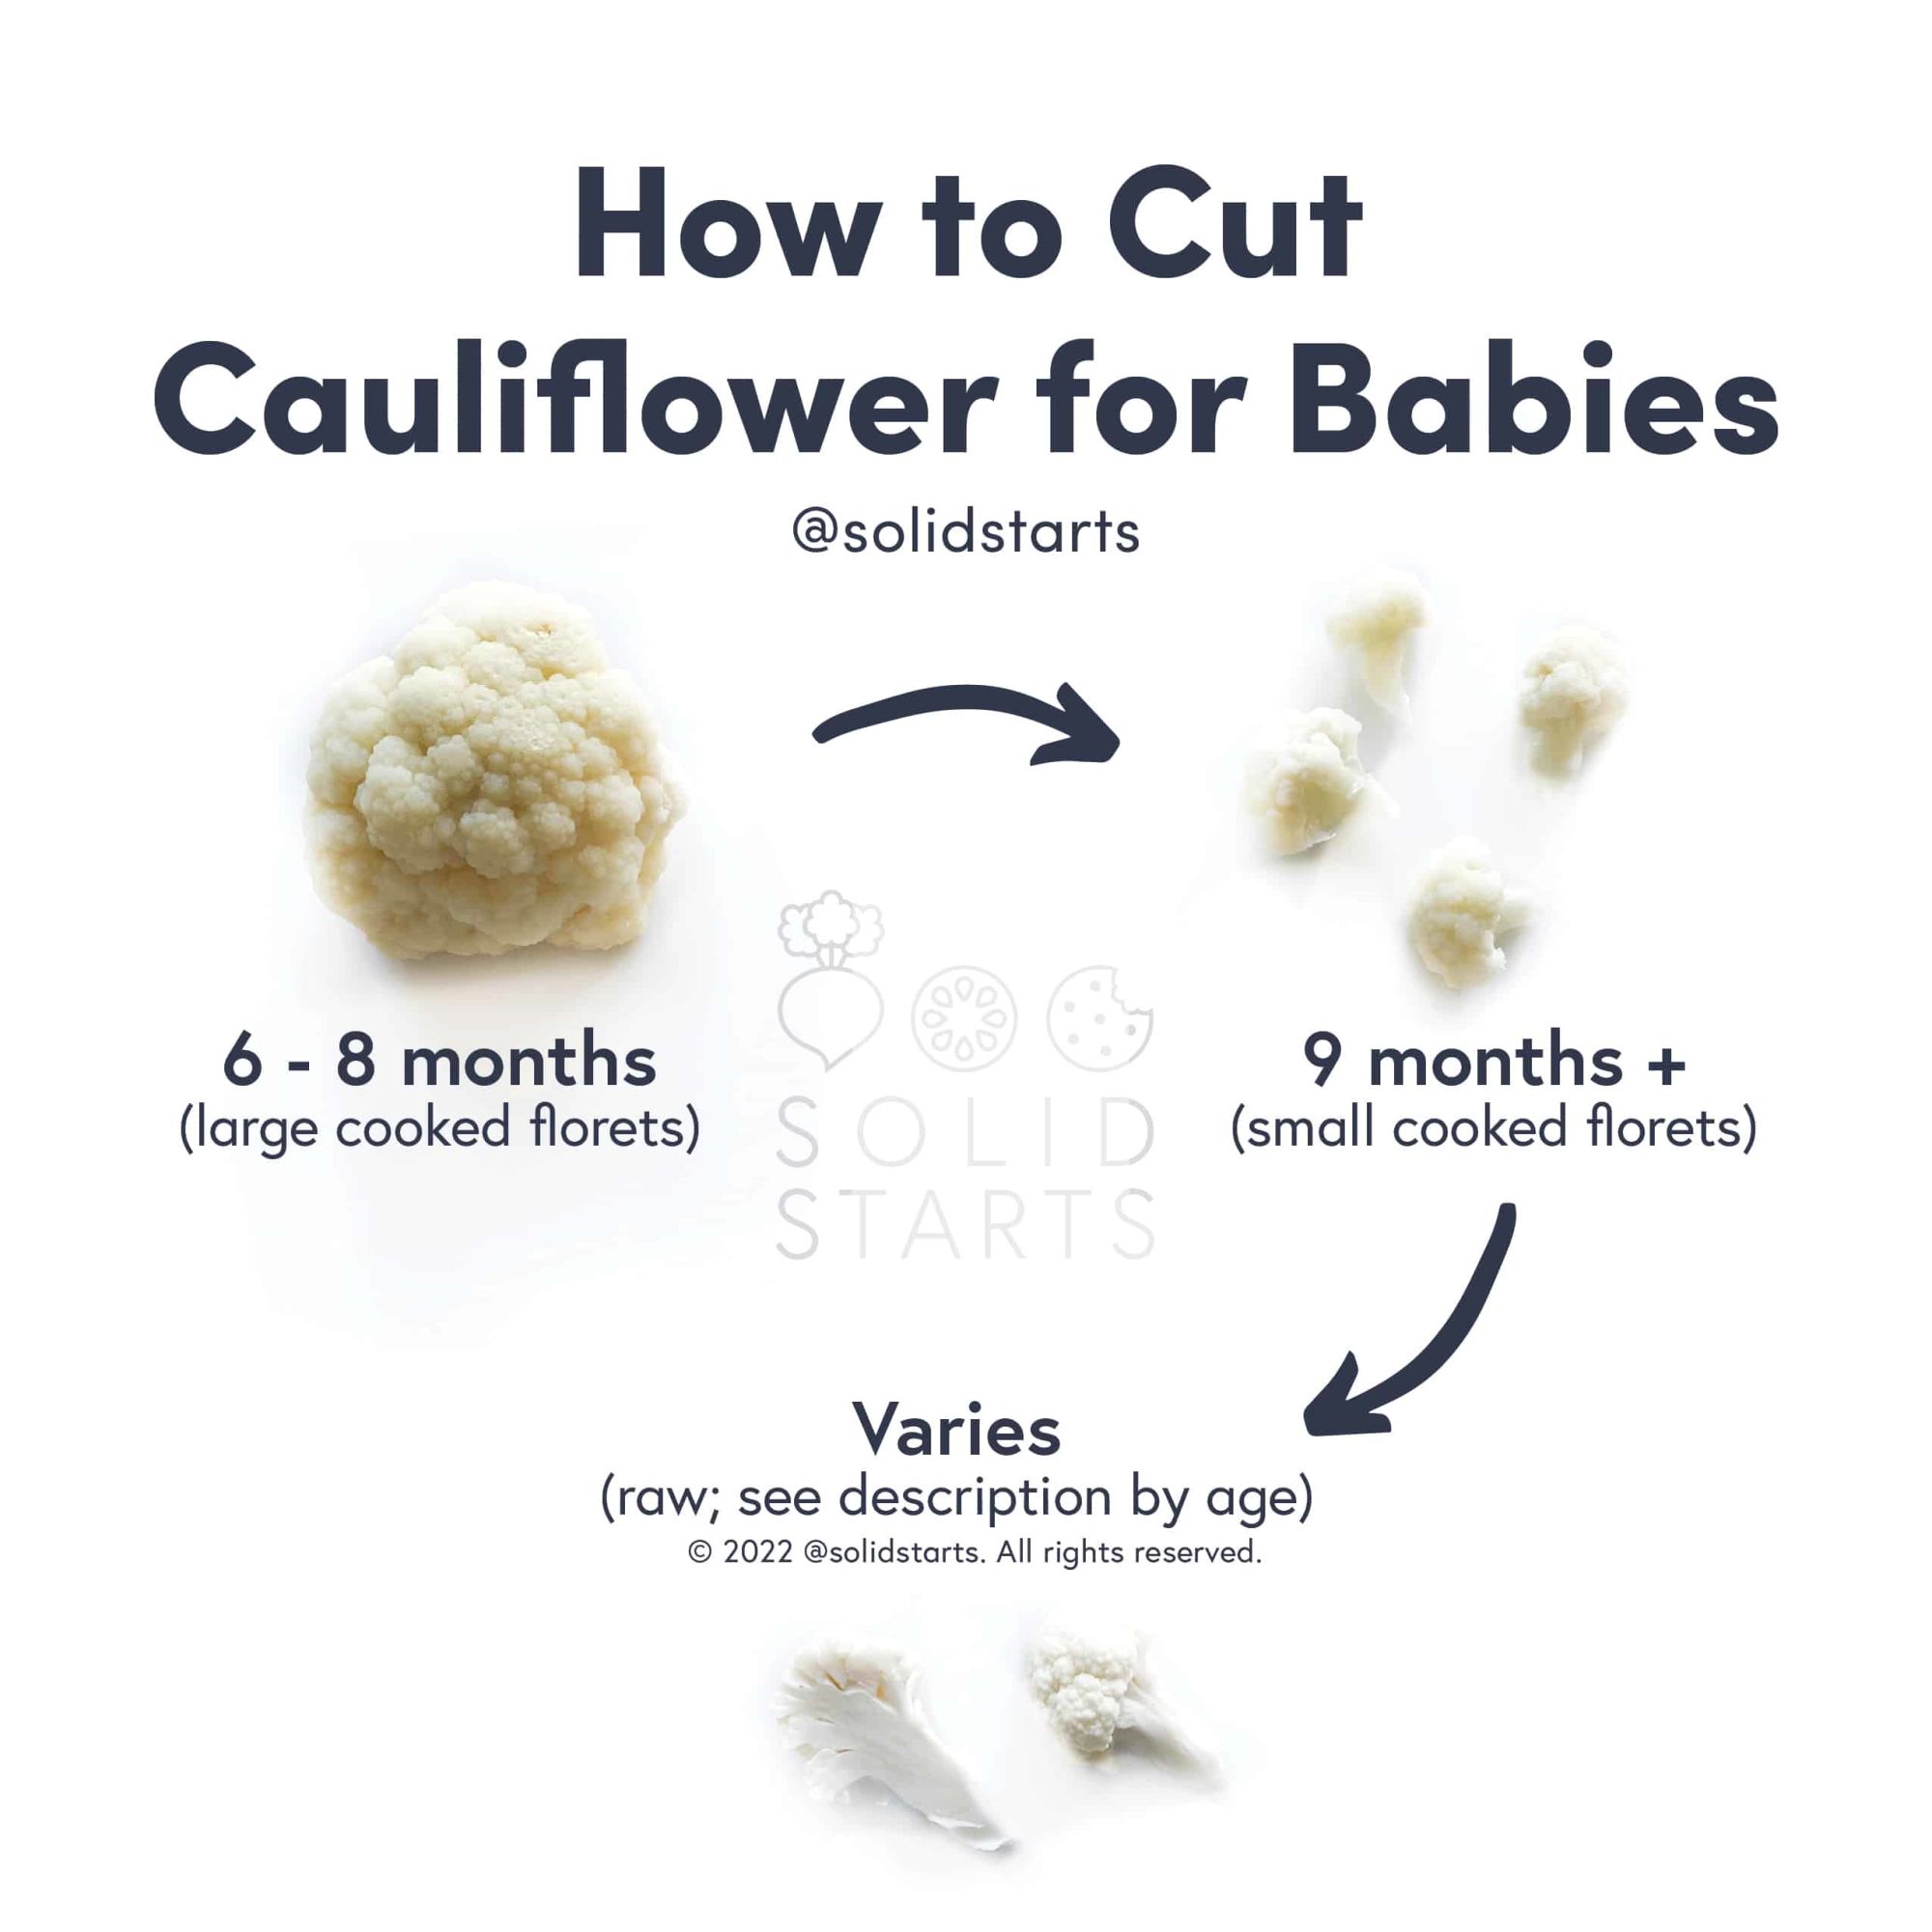 How to Cut Cauliflower for Babies